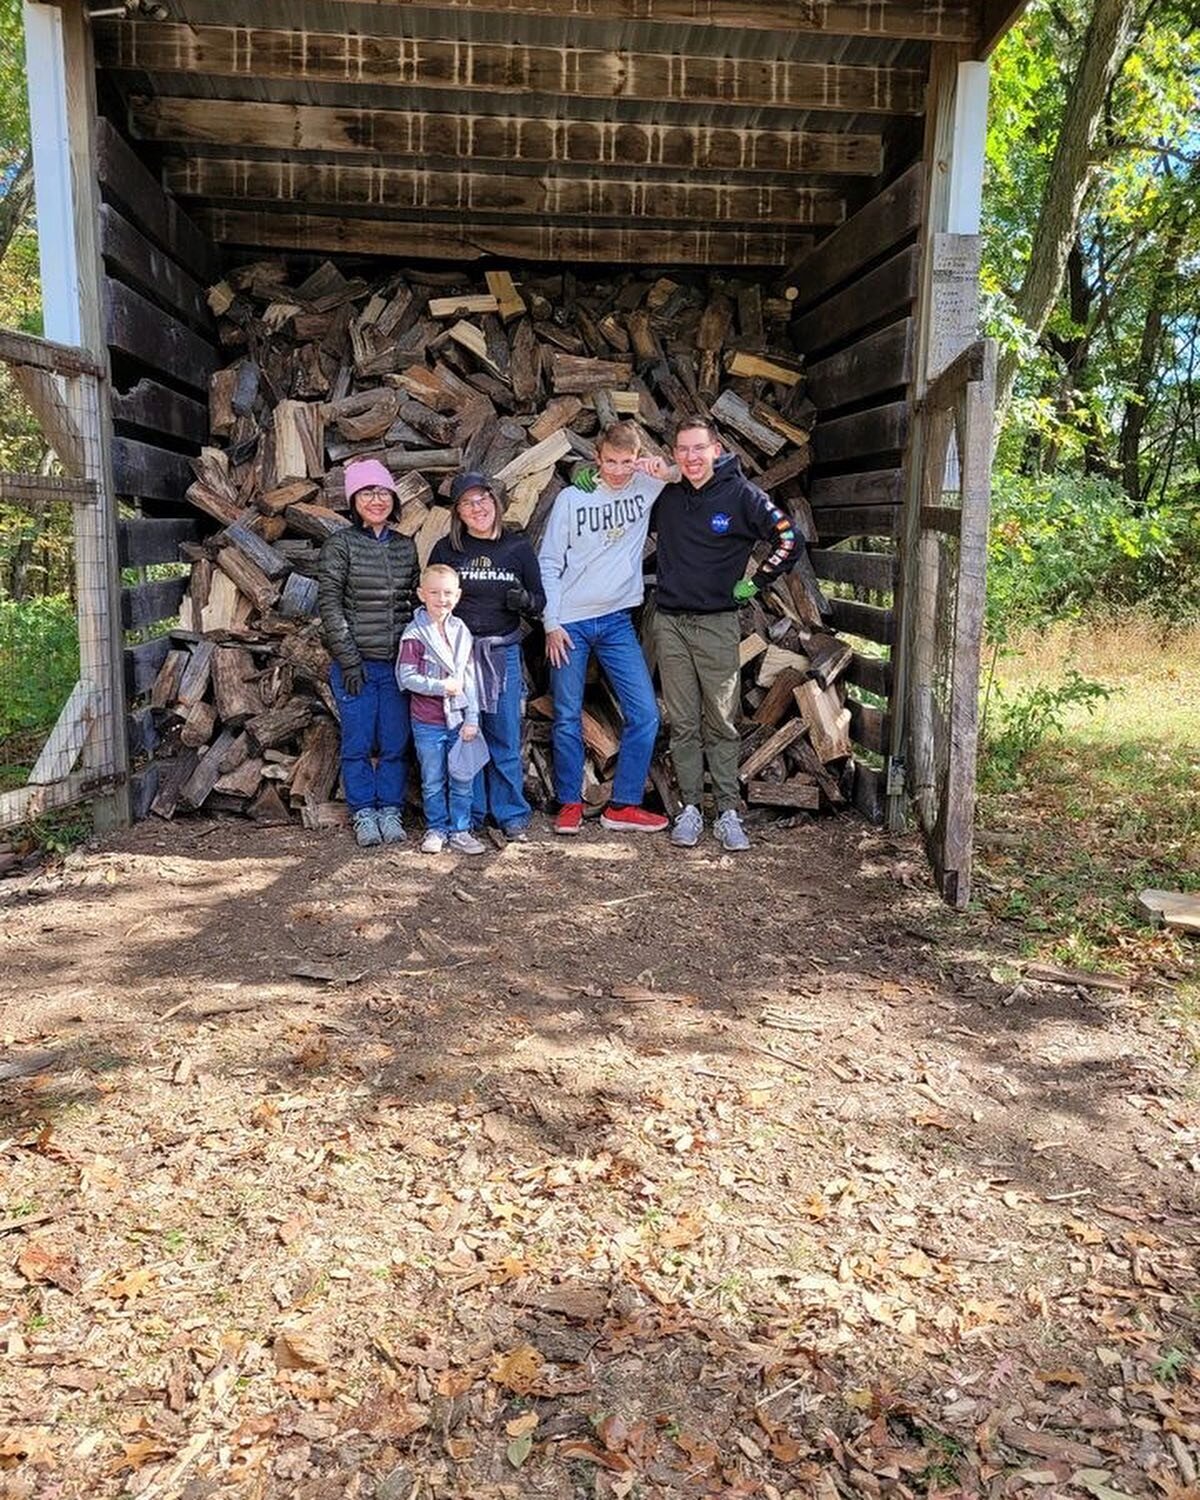 Elizabeth Knea led a group of students on a second annual service trip to @campluwisomo over the fall break! They stacked wood and completed other projects around camp before enjoying a day of sight seeing in the Dells! Thanks to those who spent thei